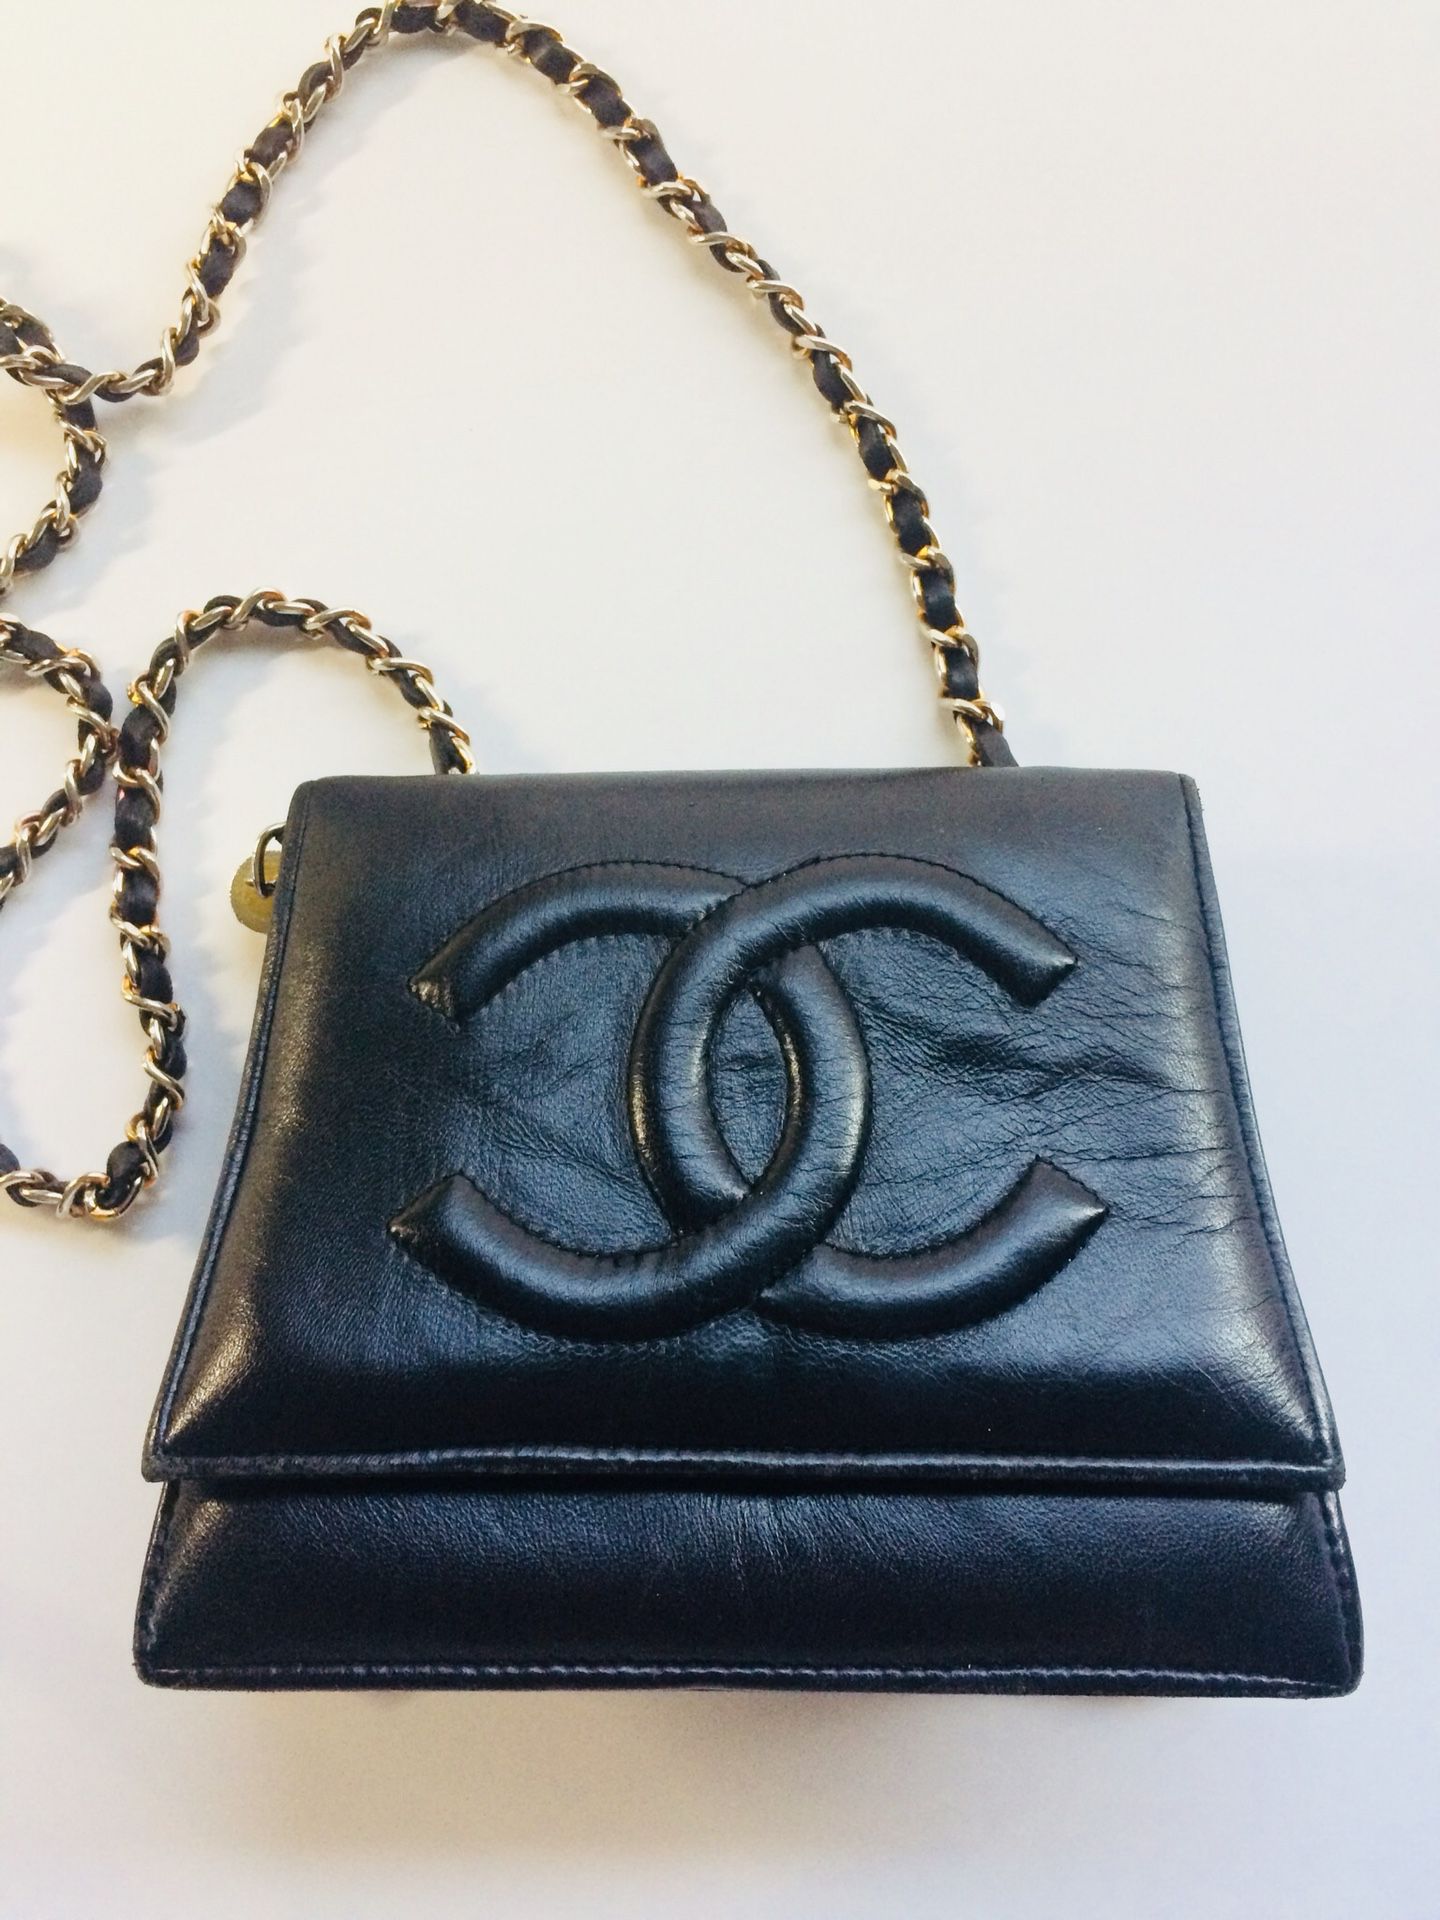 Chanel small bag - authentic and vintage